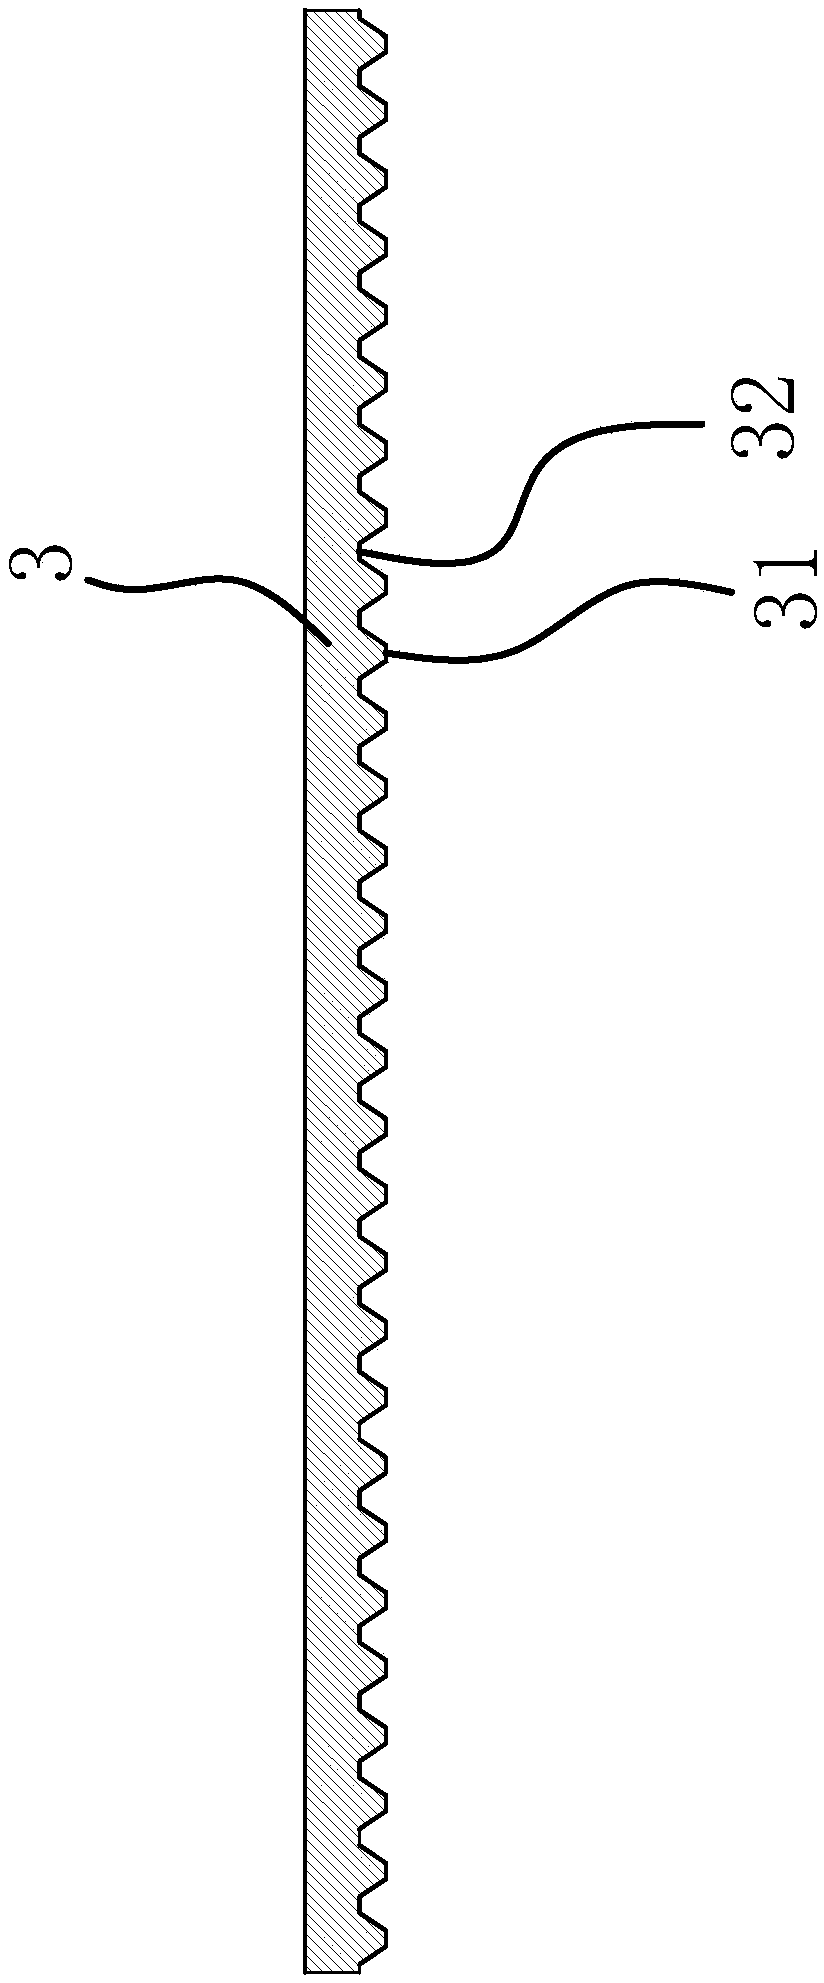 Method for processing plate with expanded bamboo as raw material